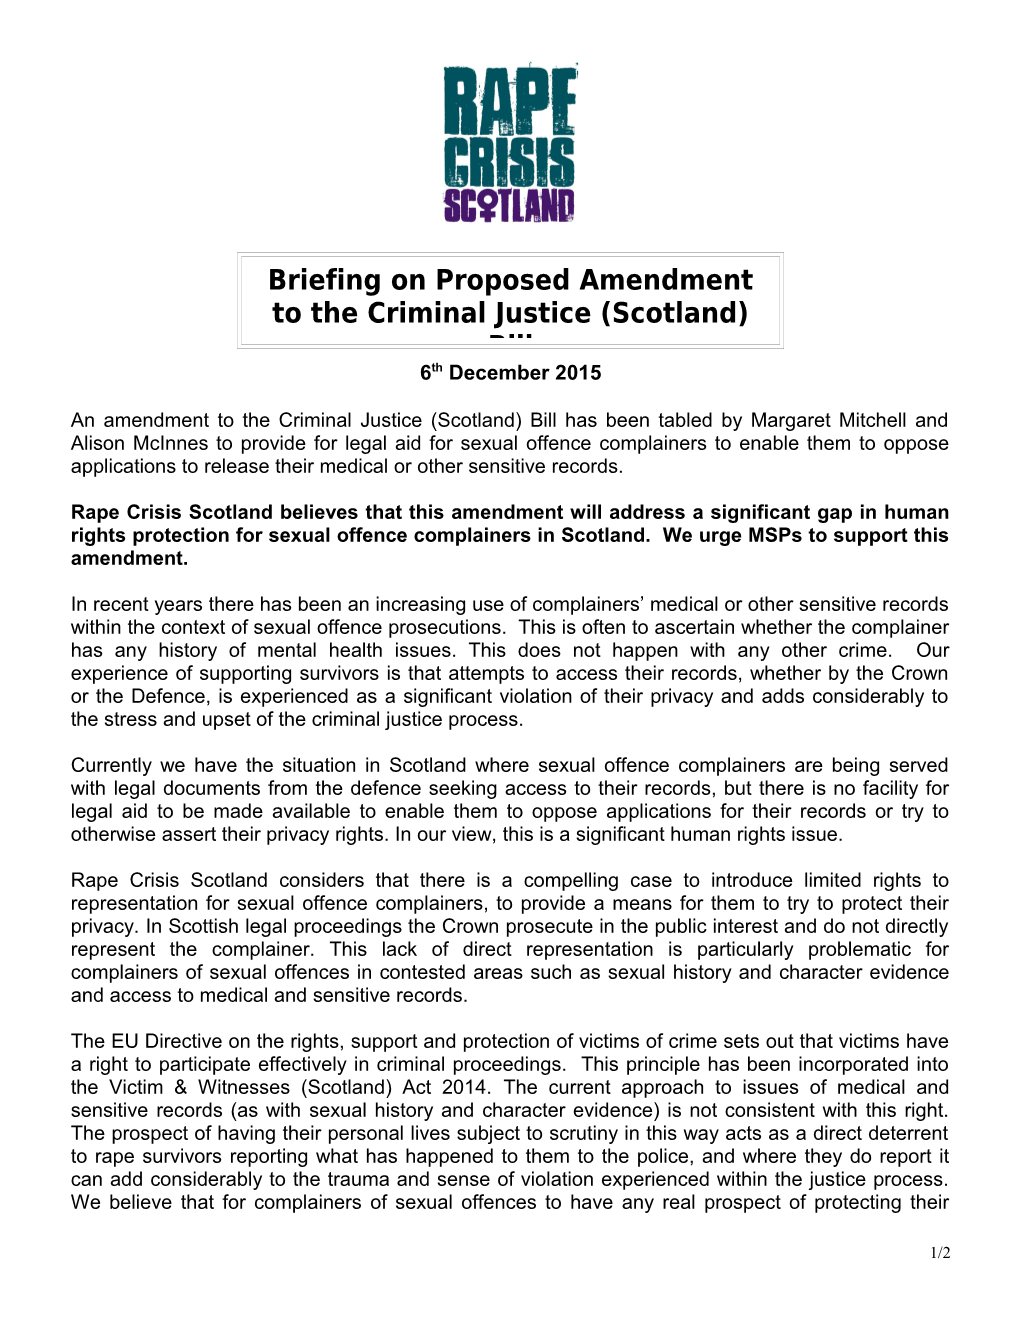 Rape Crisis Scotland Believes That This Amendment Will Address a Significant Gap in Human